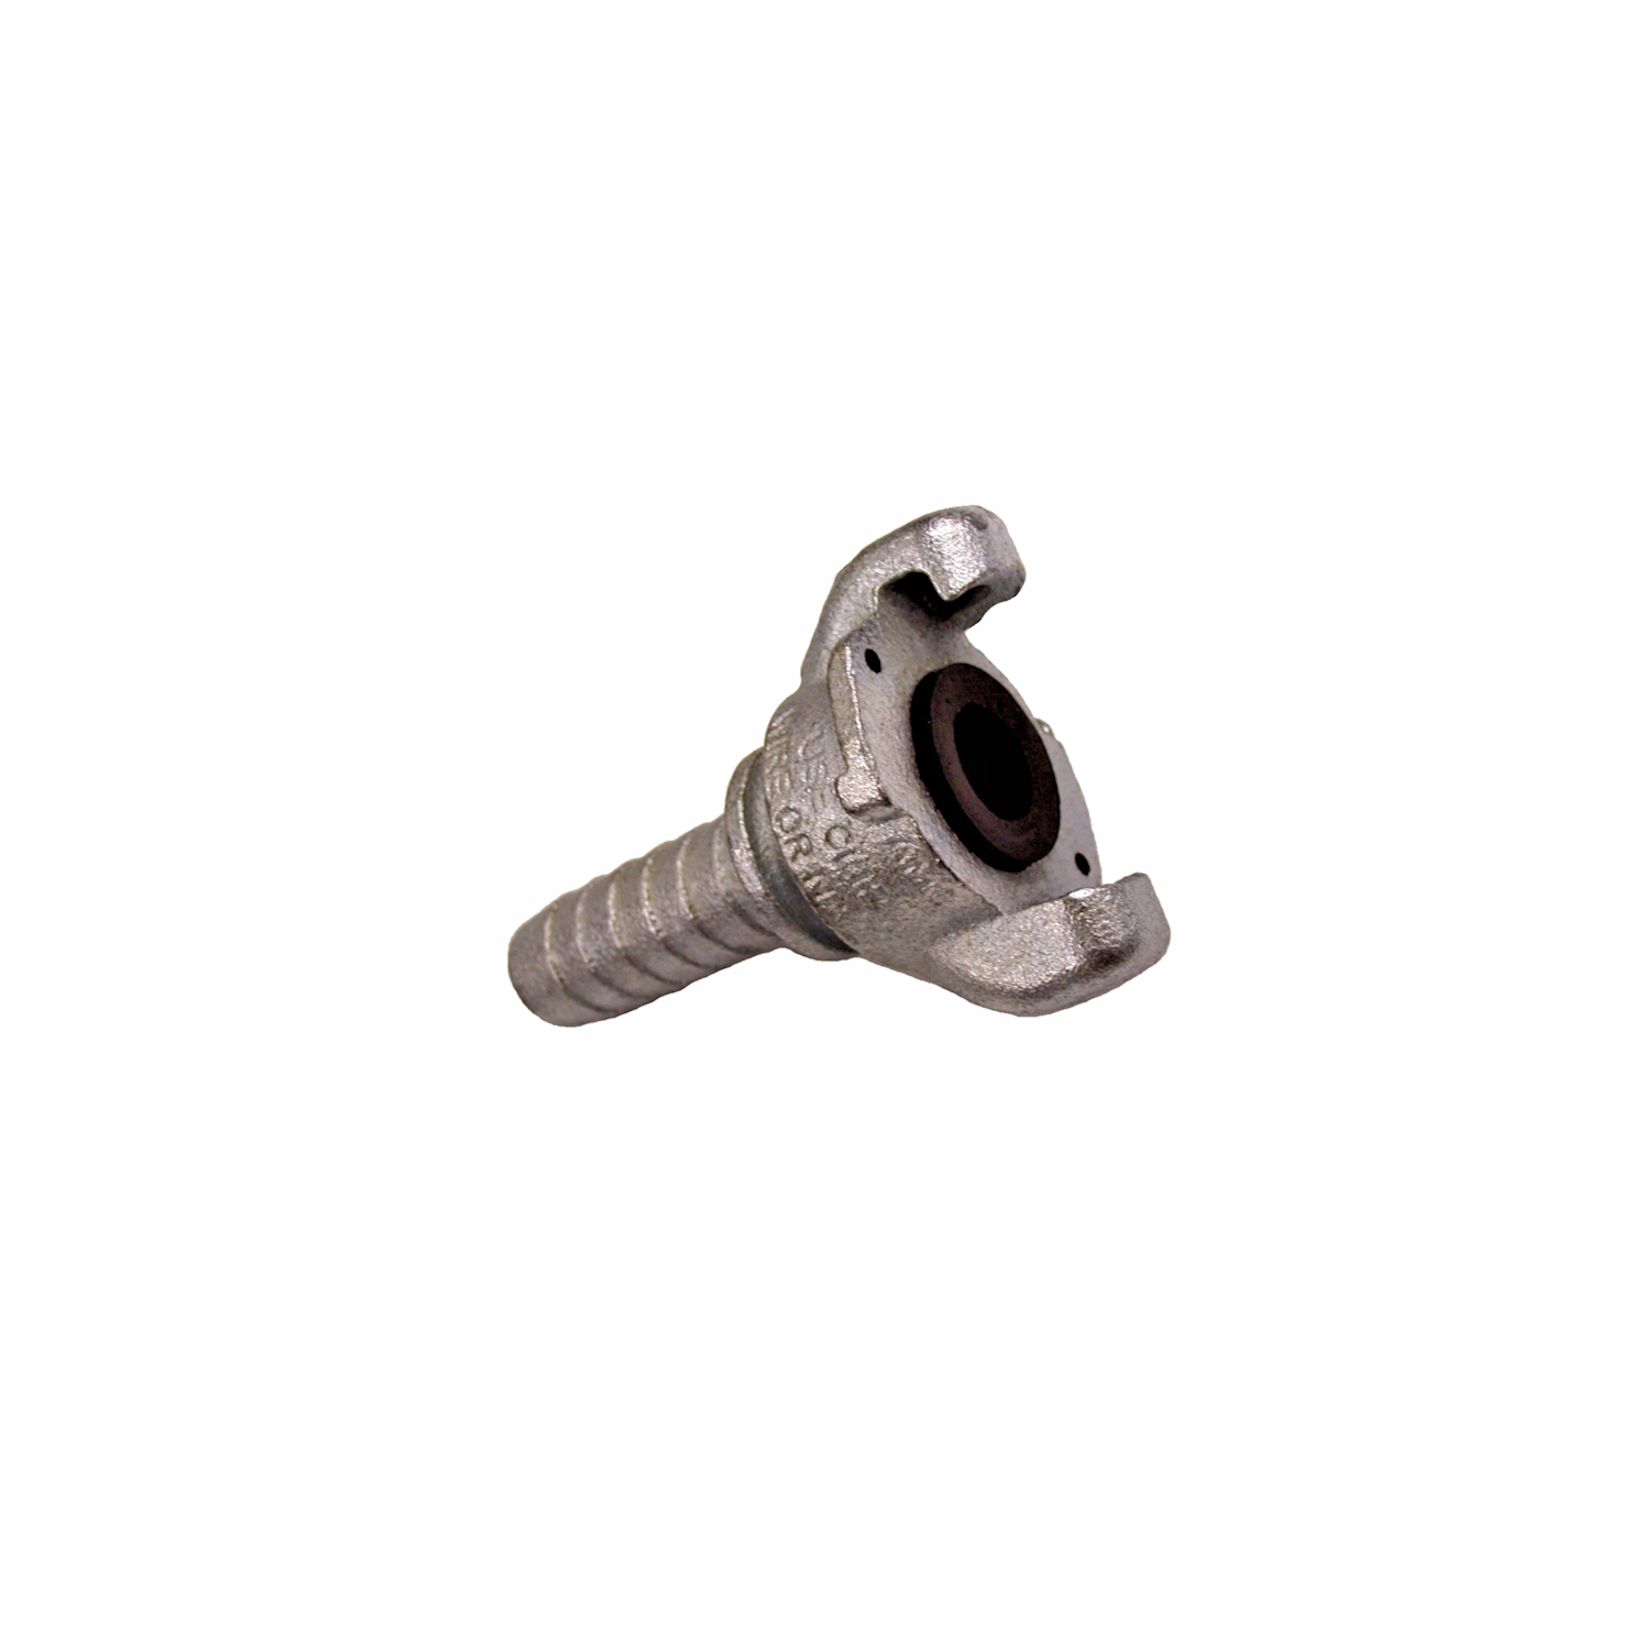 3/4" Hose End Universal Crowfoot Chicago Coupling Fitting Plated Iron <SFH075 